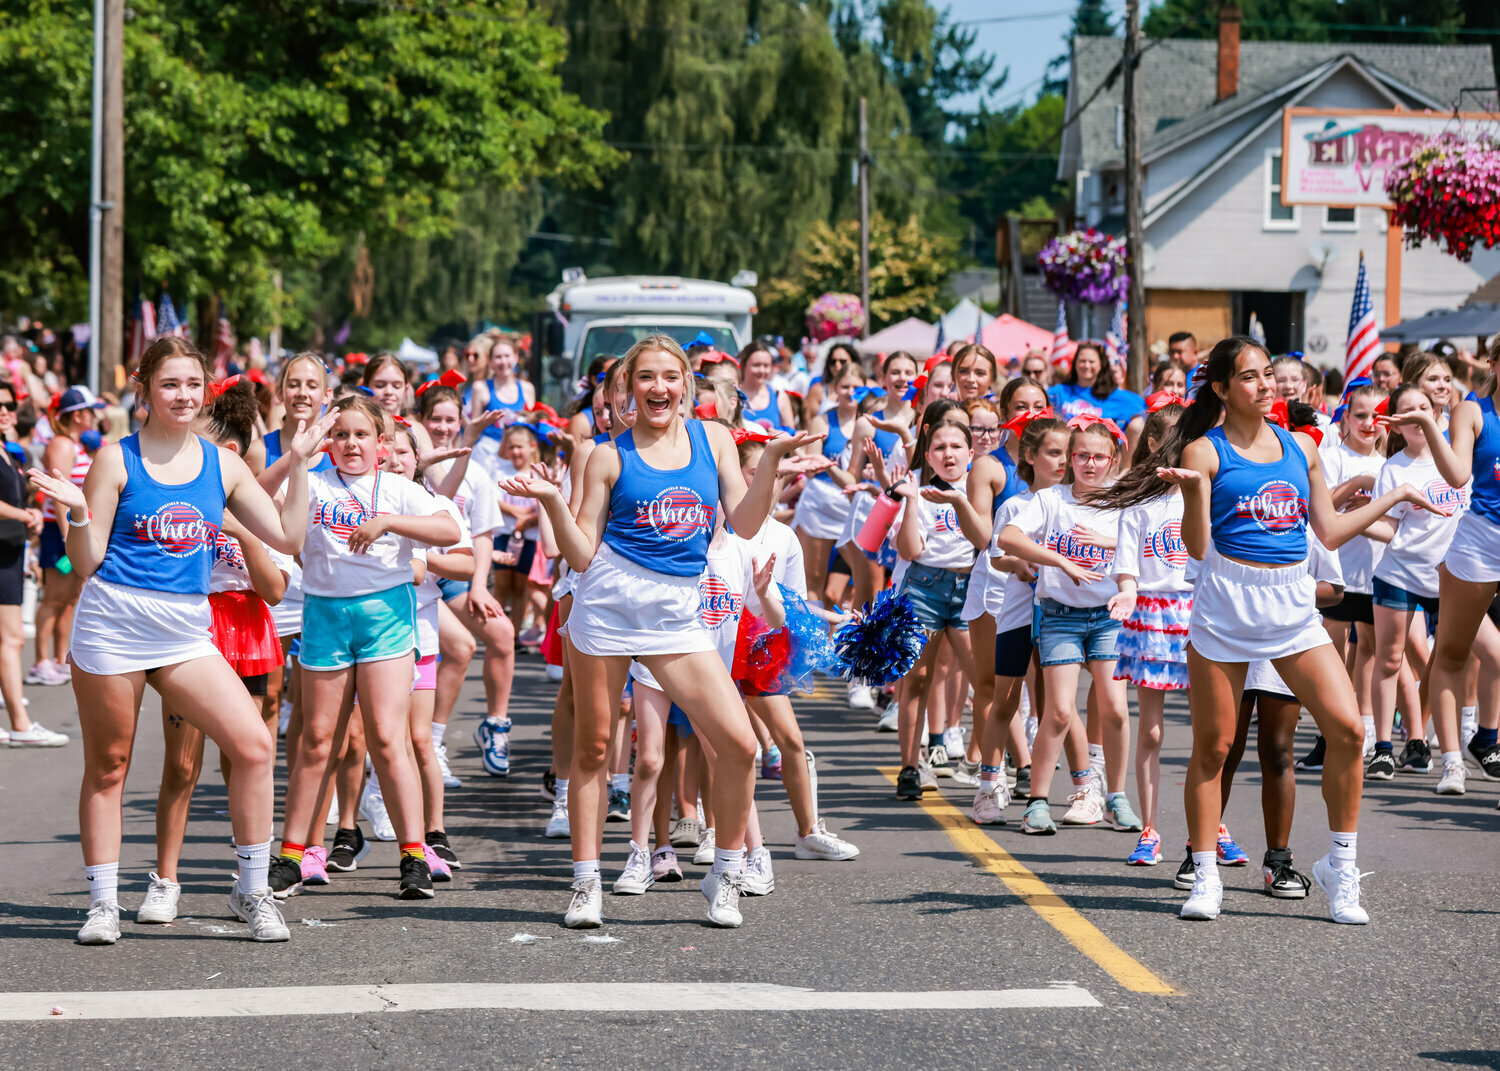 Ridgefield’s cheer program gives a demonstration on North Third Avenue during the Fourth of July parade on July 4.